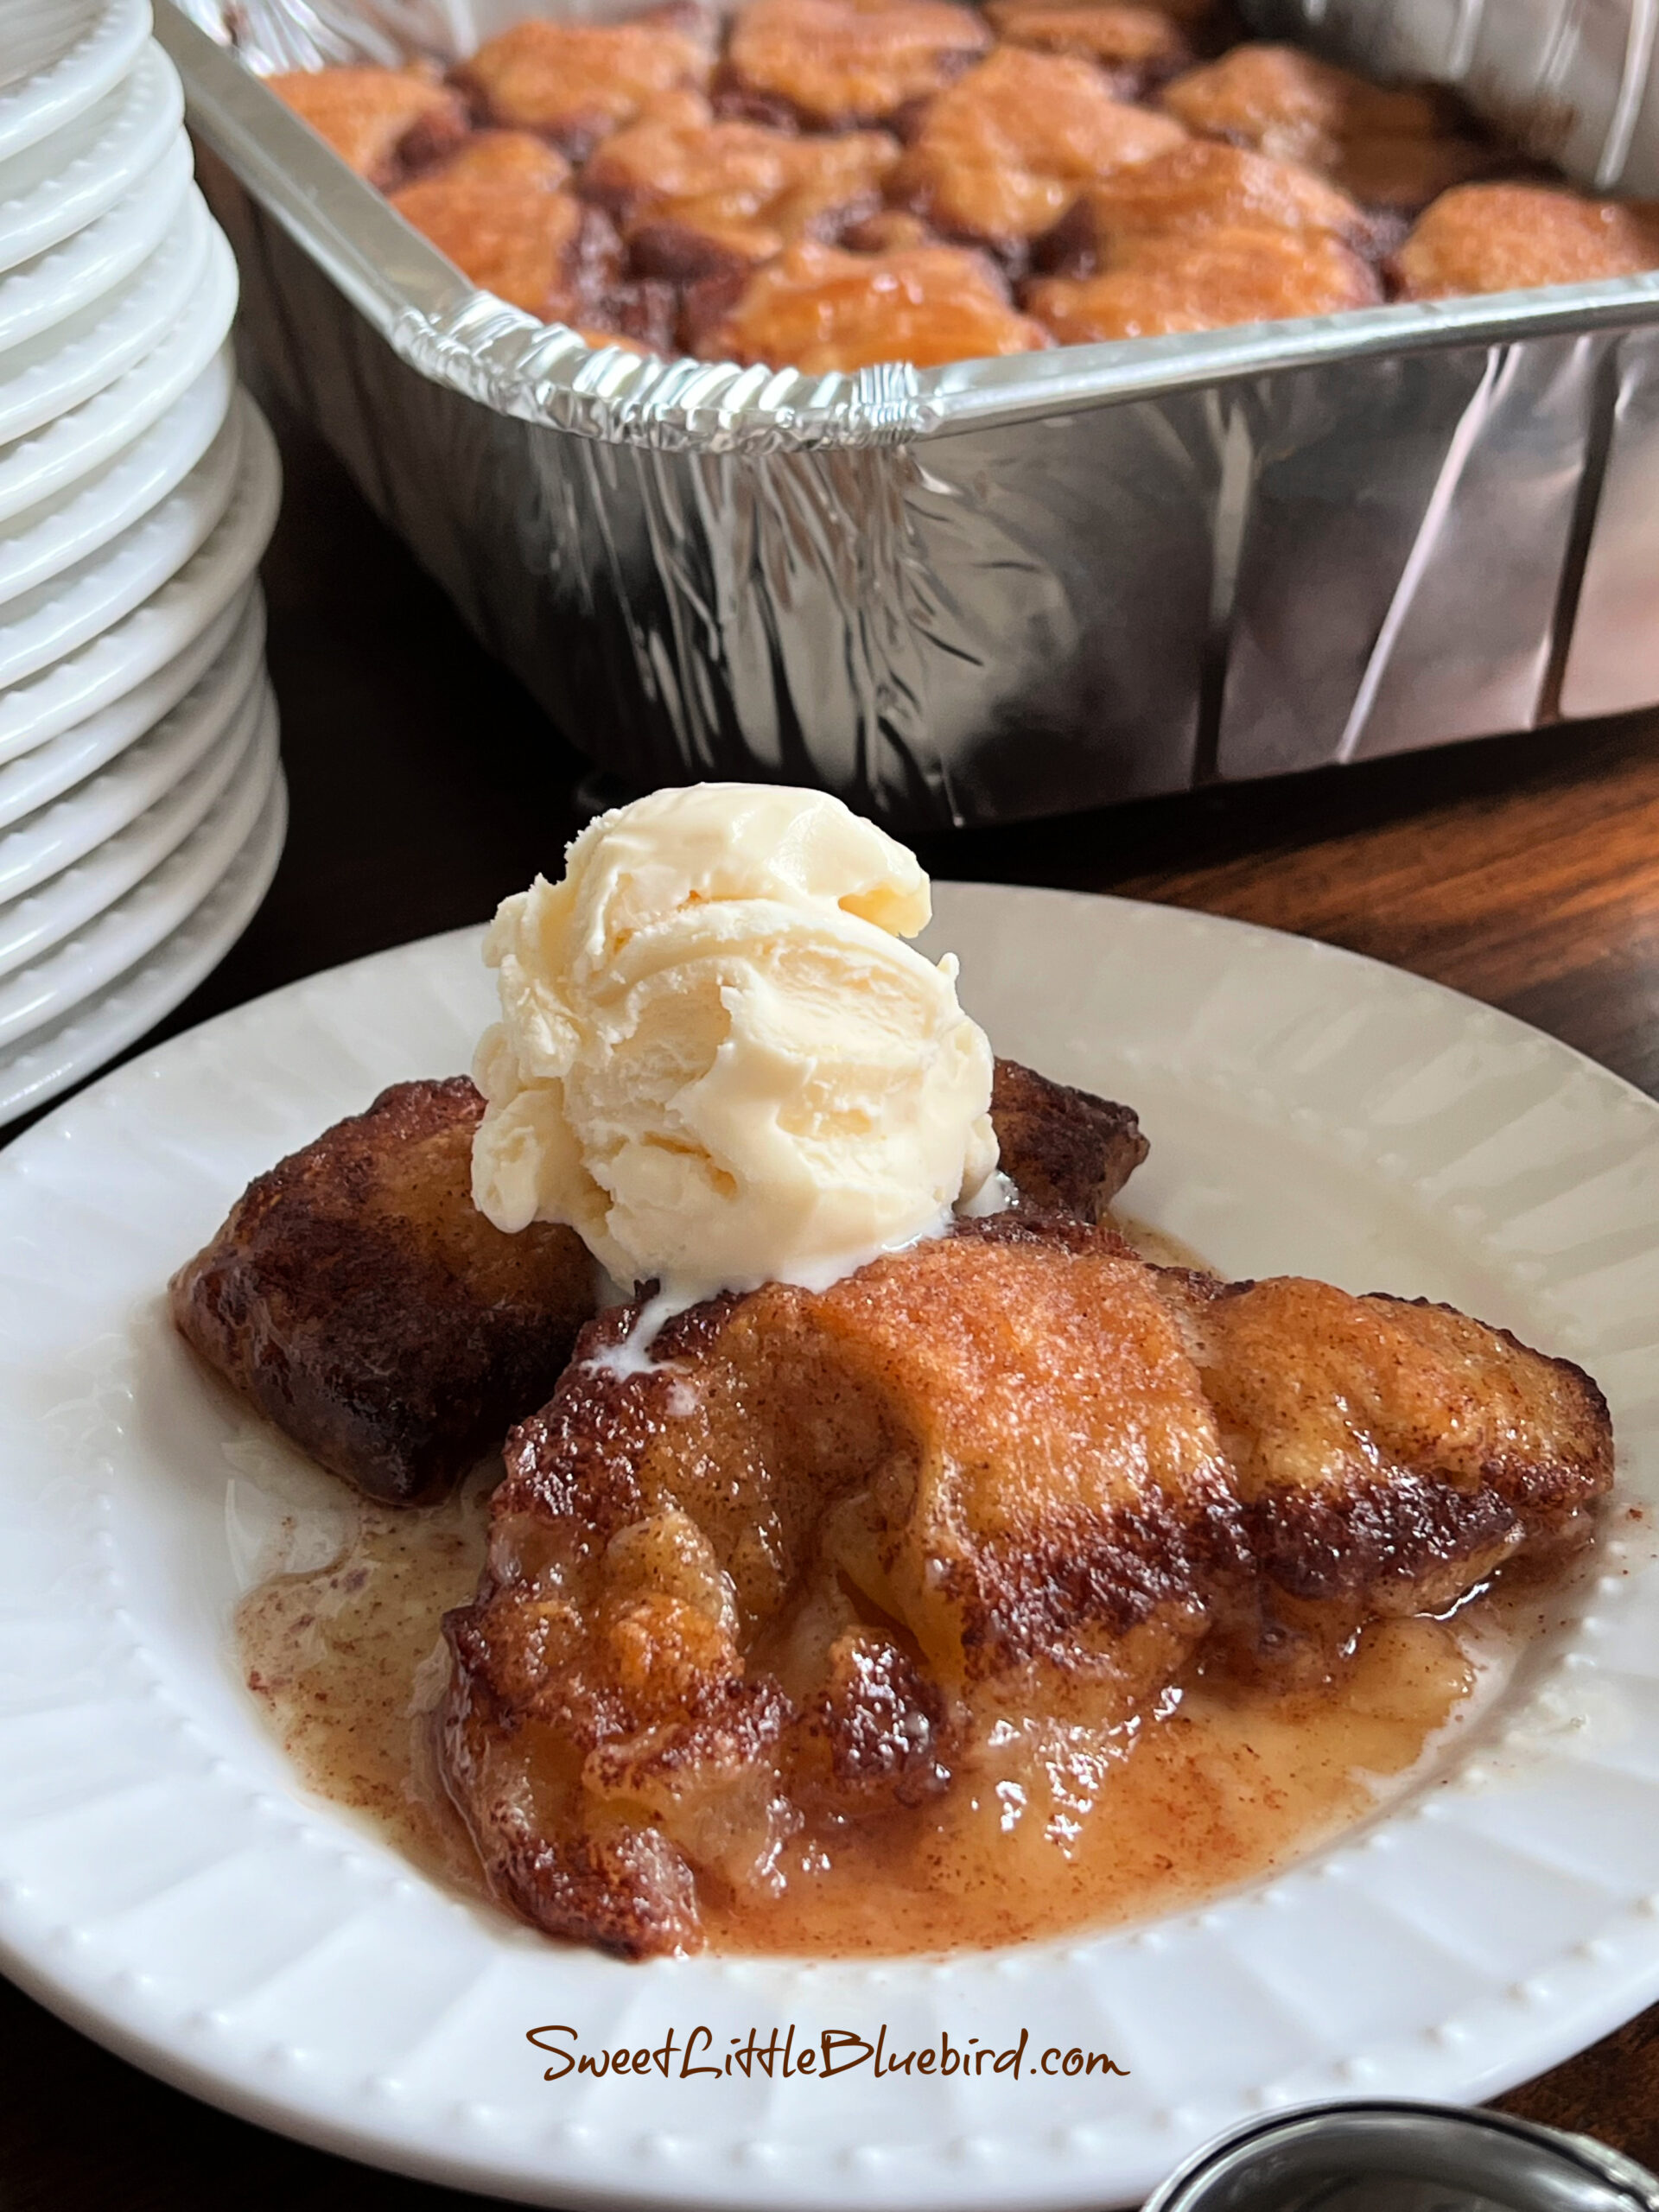 This photo shows 2 peach dumplings on a plate with a scoop of vanilla ice cream on top. 